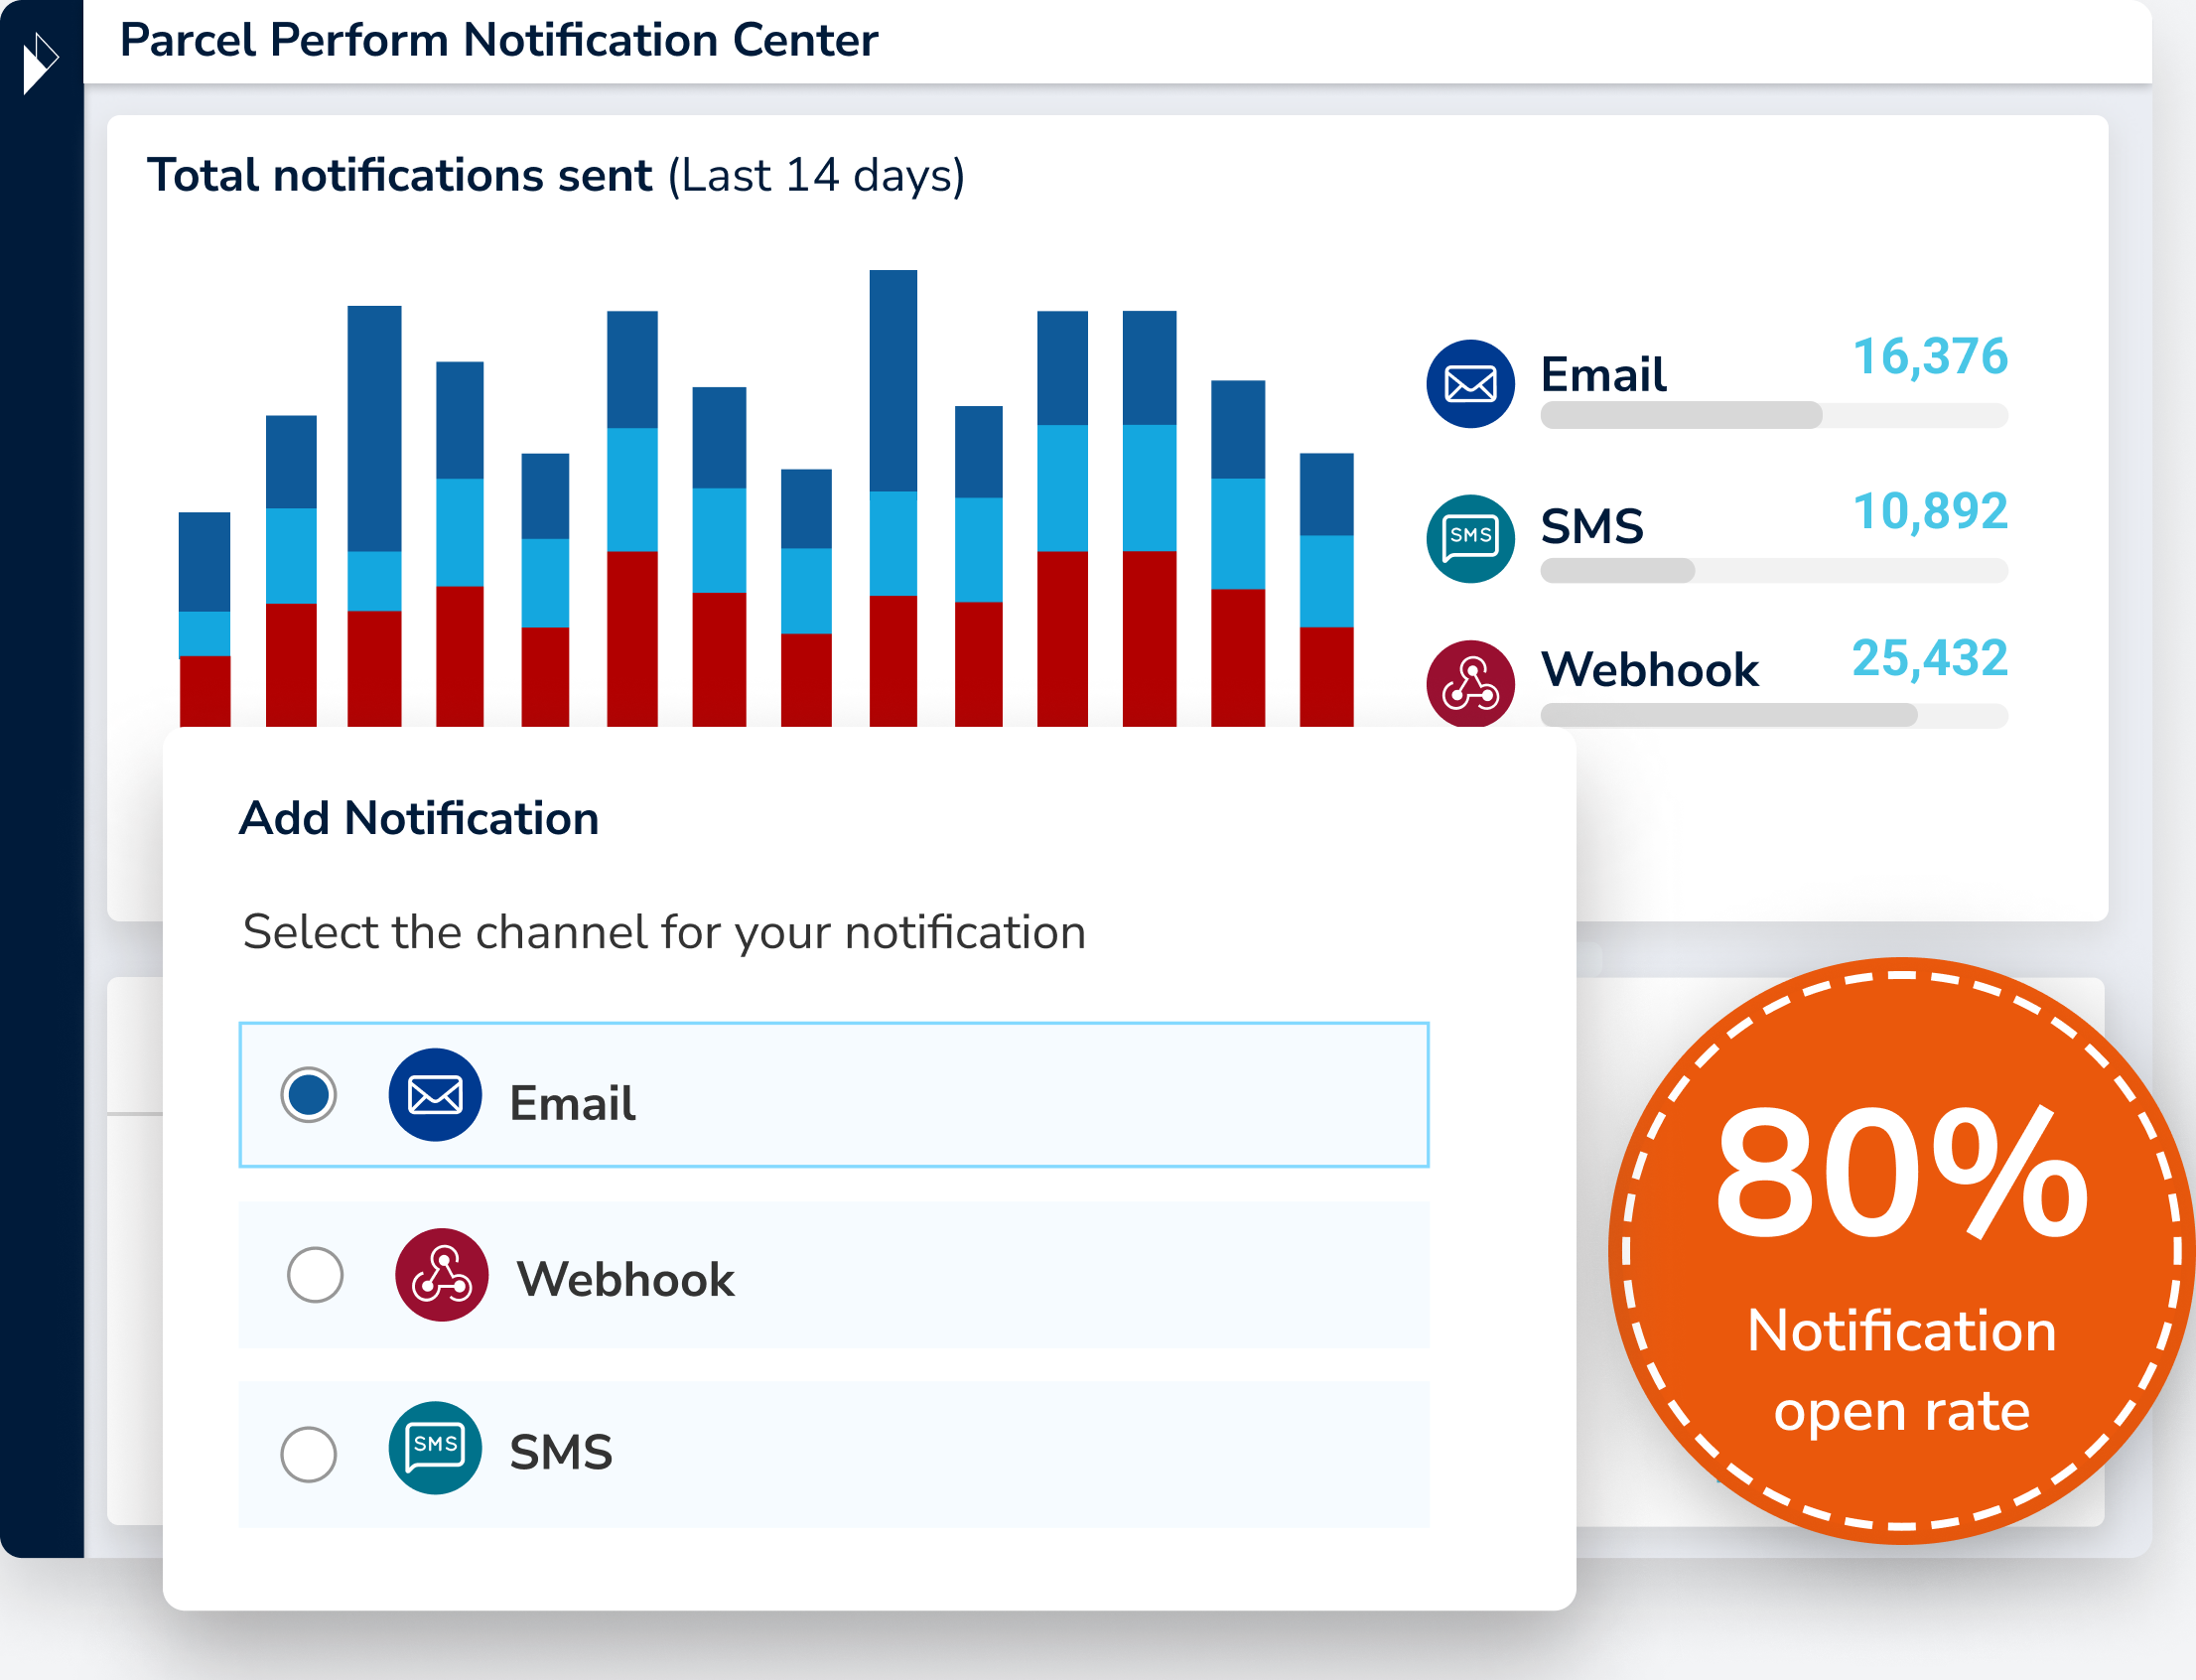 Parcel Perform notification center showing a graph of total notifications sent through email, webhook and SMS channels